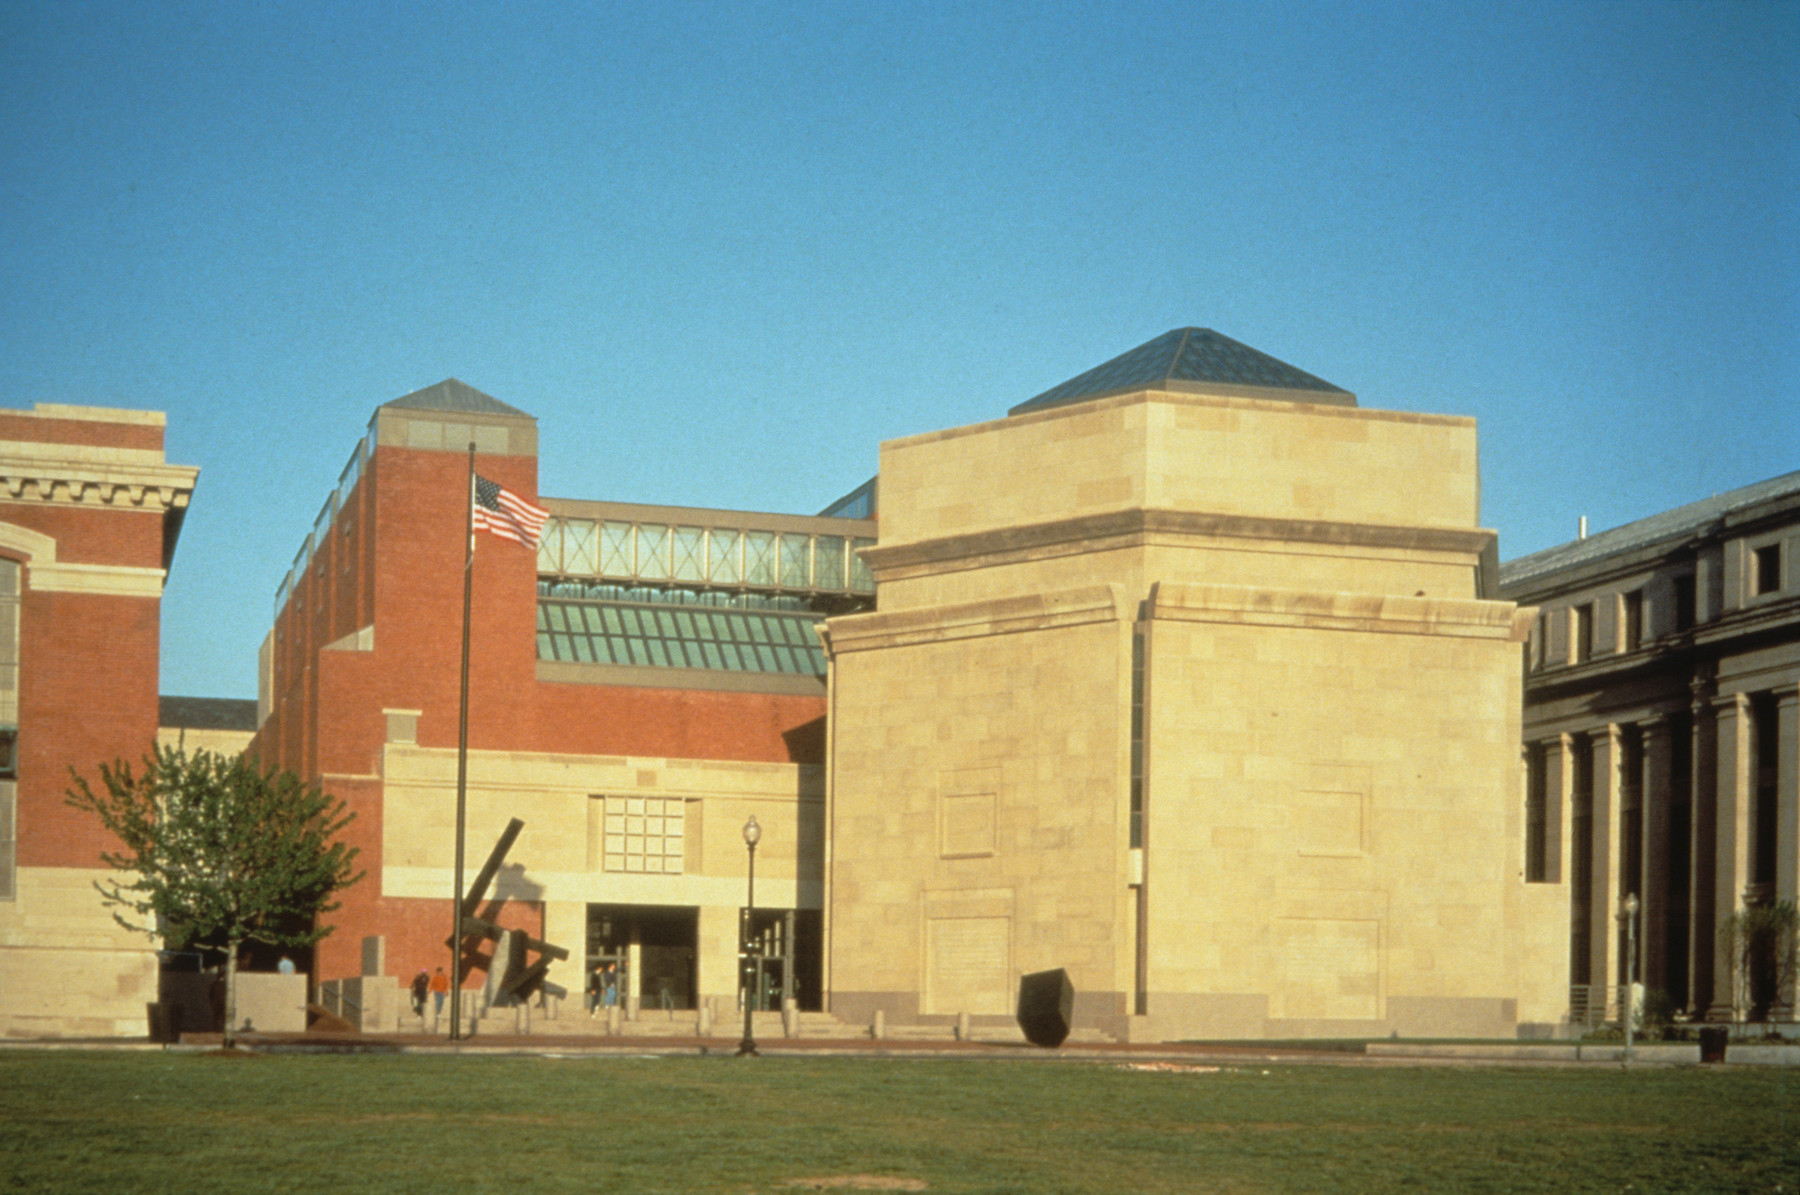 View of the U.S. Holocaust Memorial Museum from 15th Street.